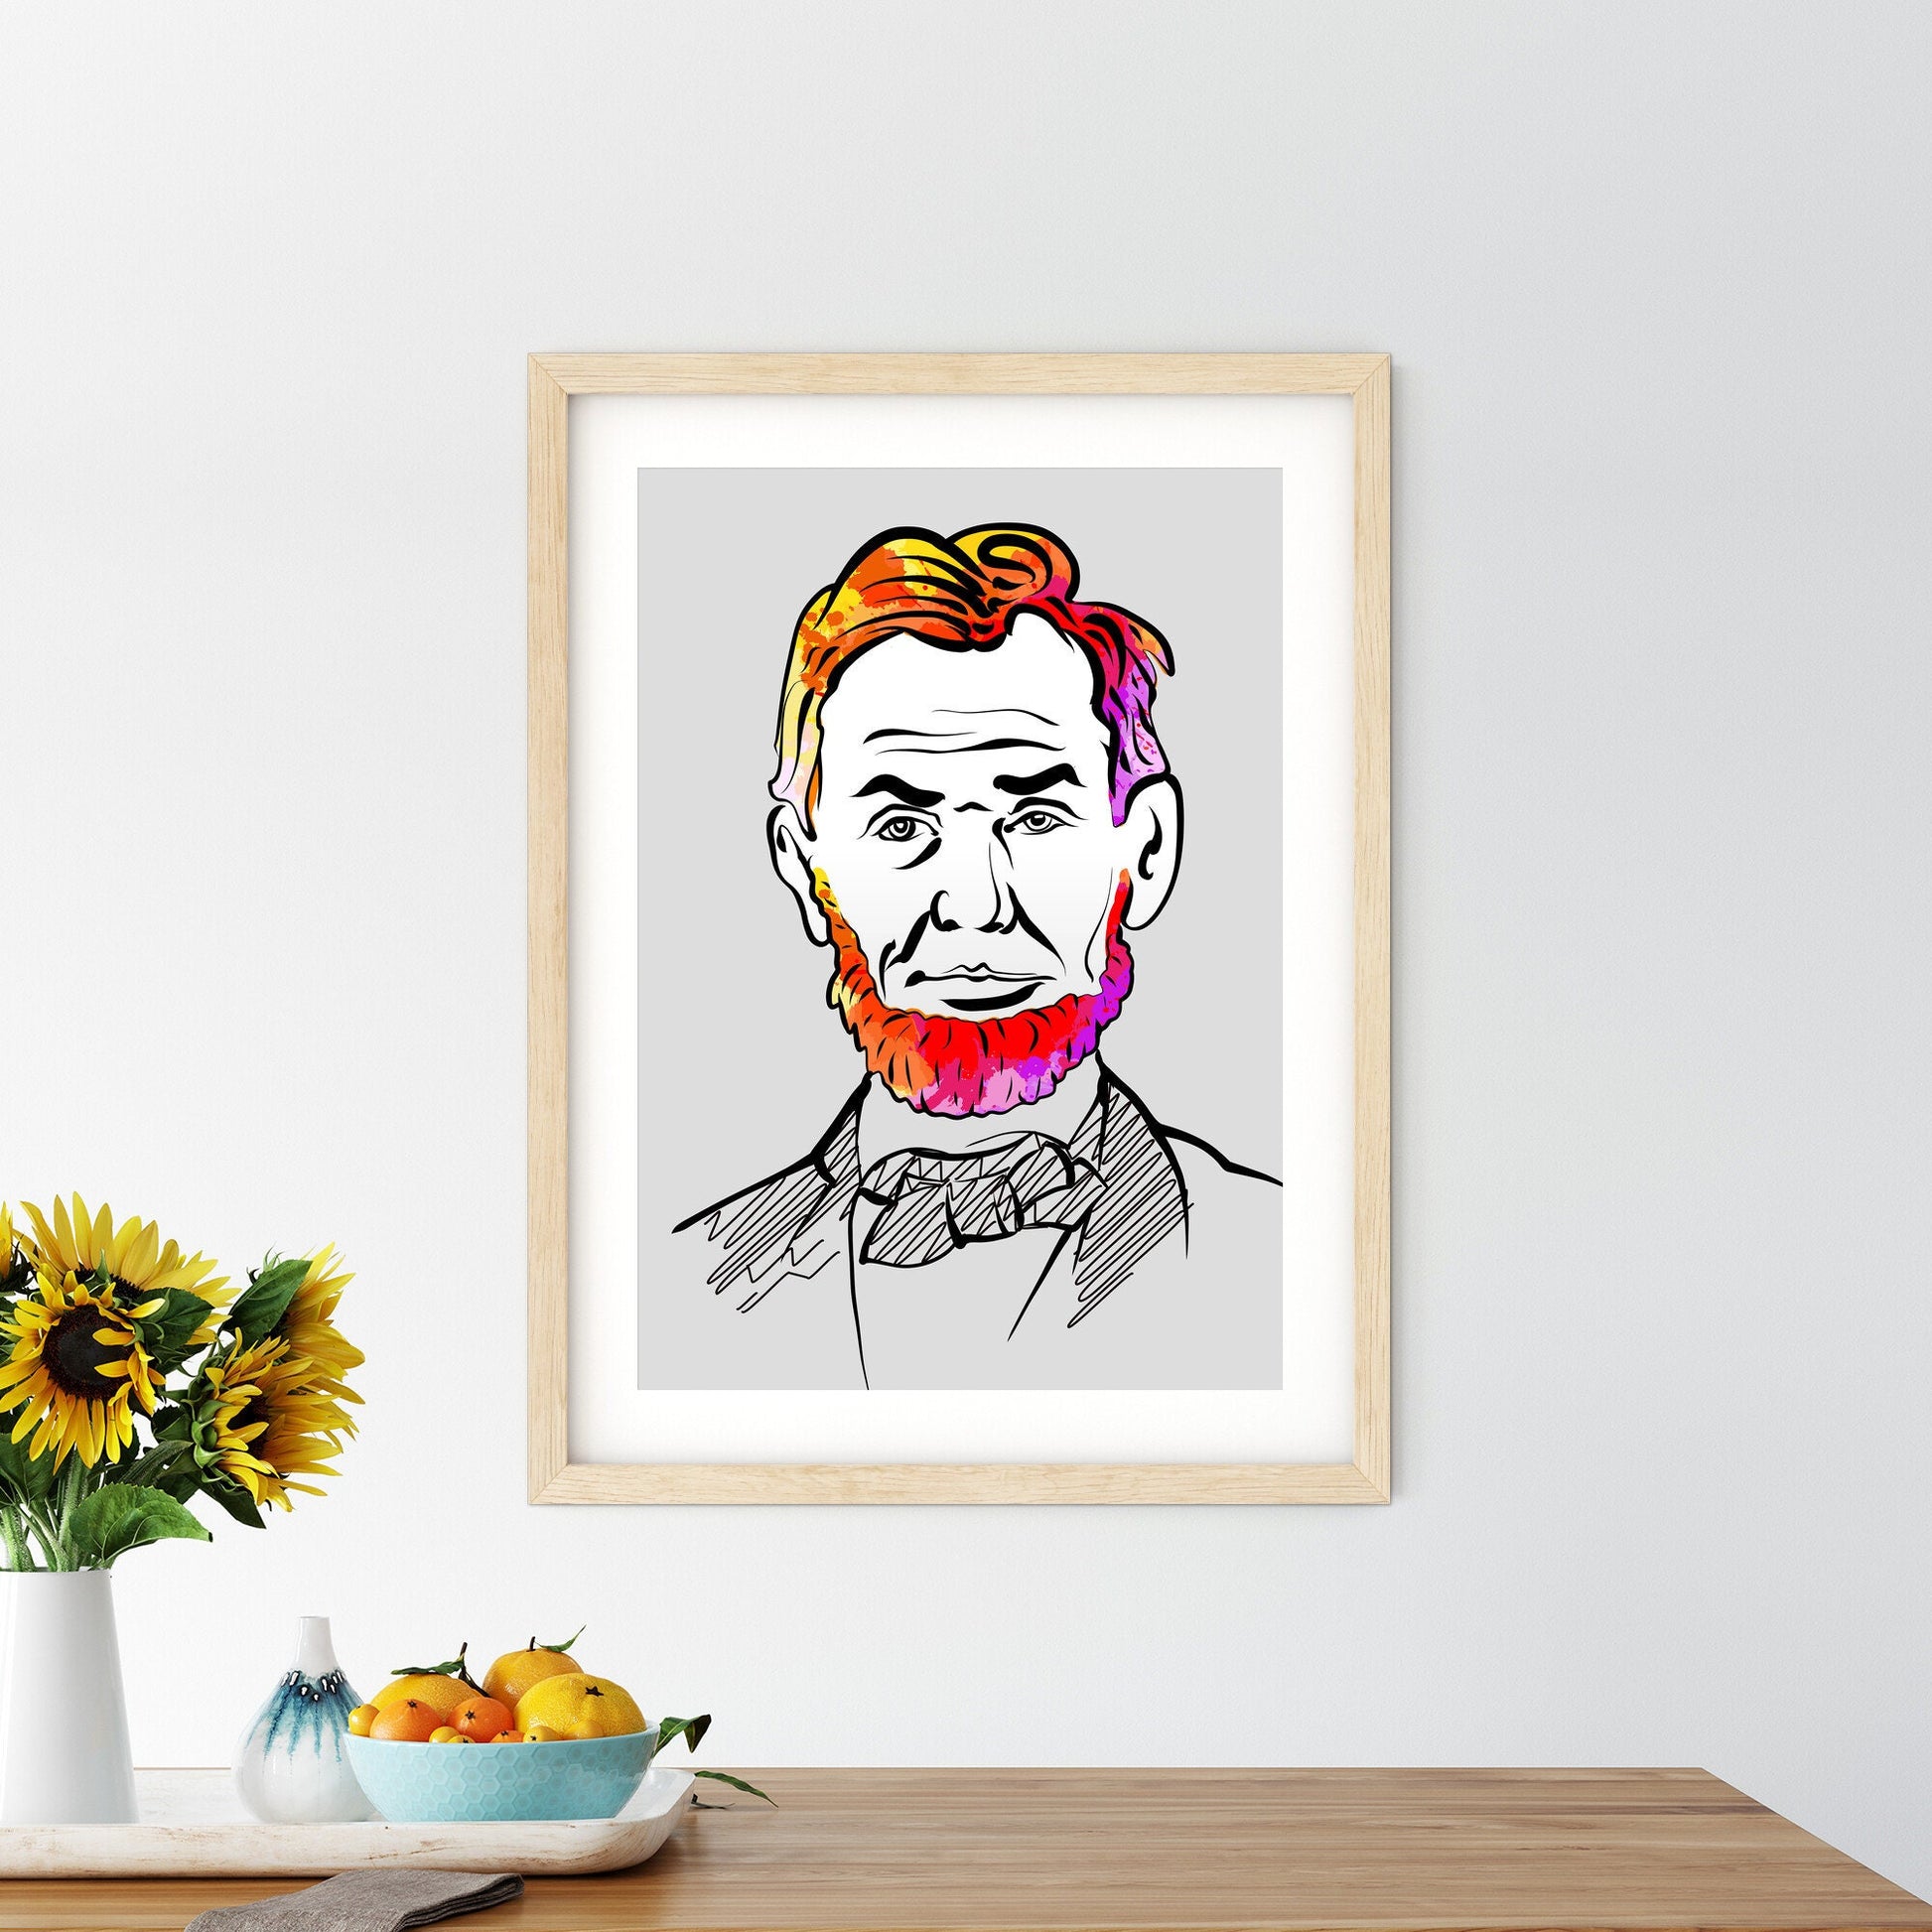 Abraham Lincoln Portrait Poster With Colorful Hair. Perfect print for patriots.